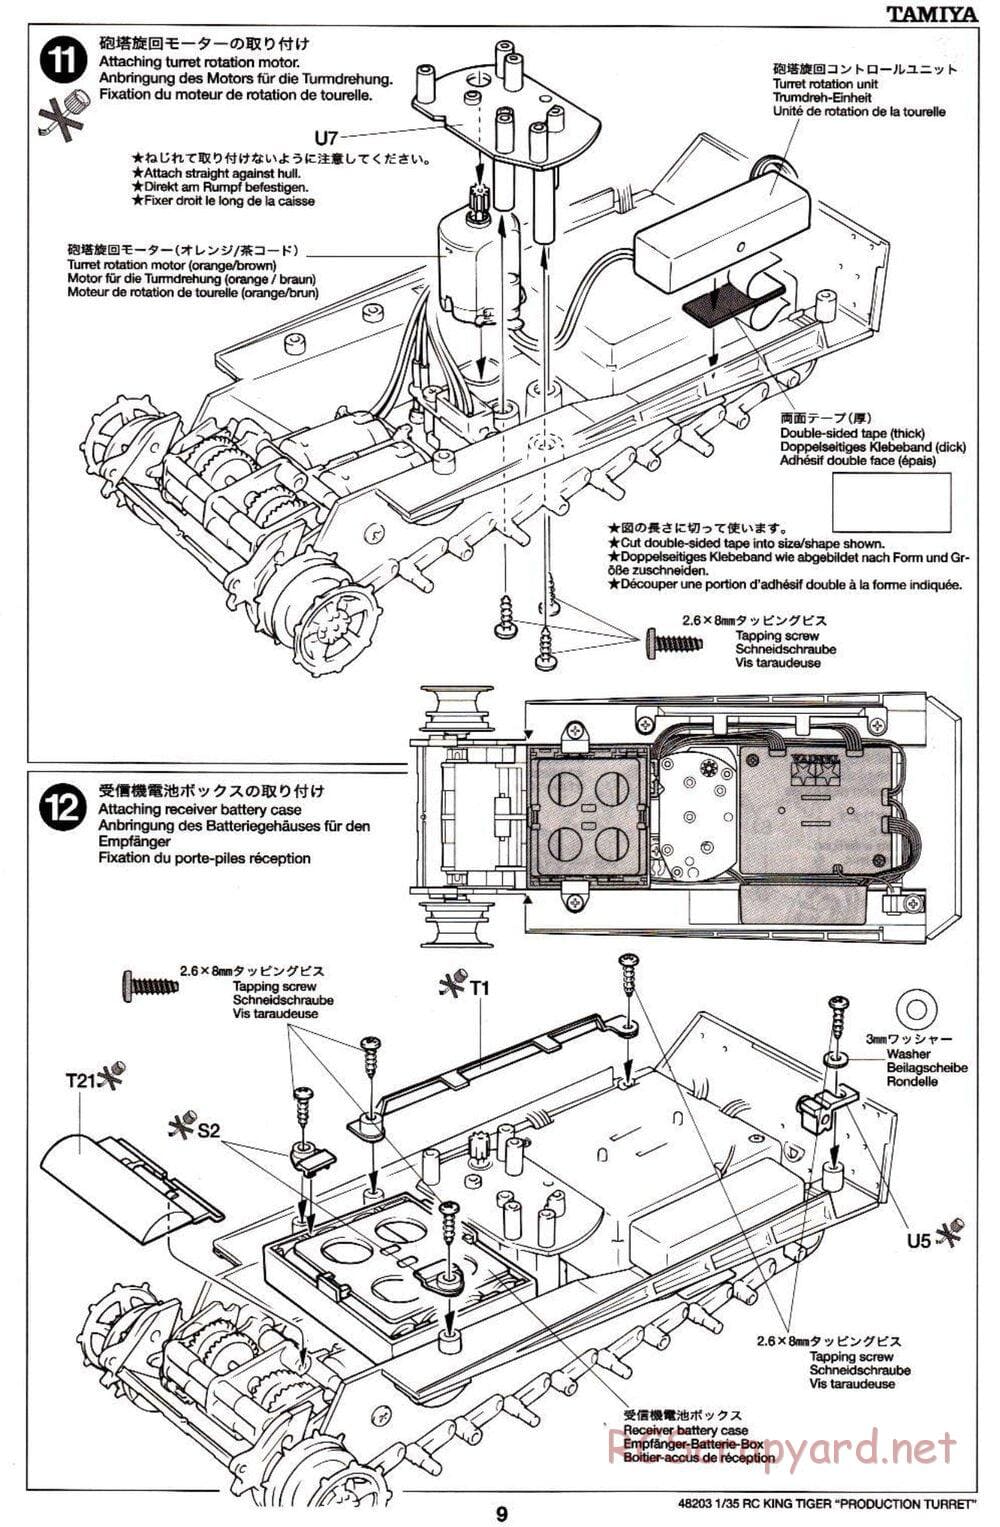 Tamiya - German King Tiger (Production Turret) - 1/35 Scale Chassis - Manual - Page 9